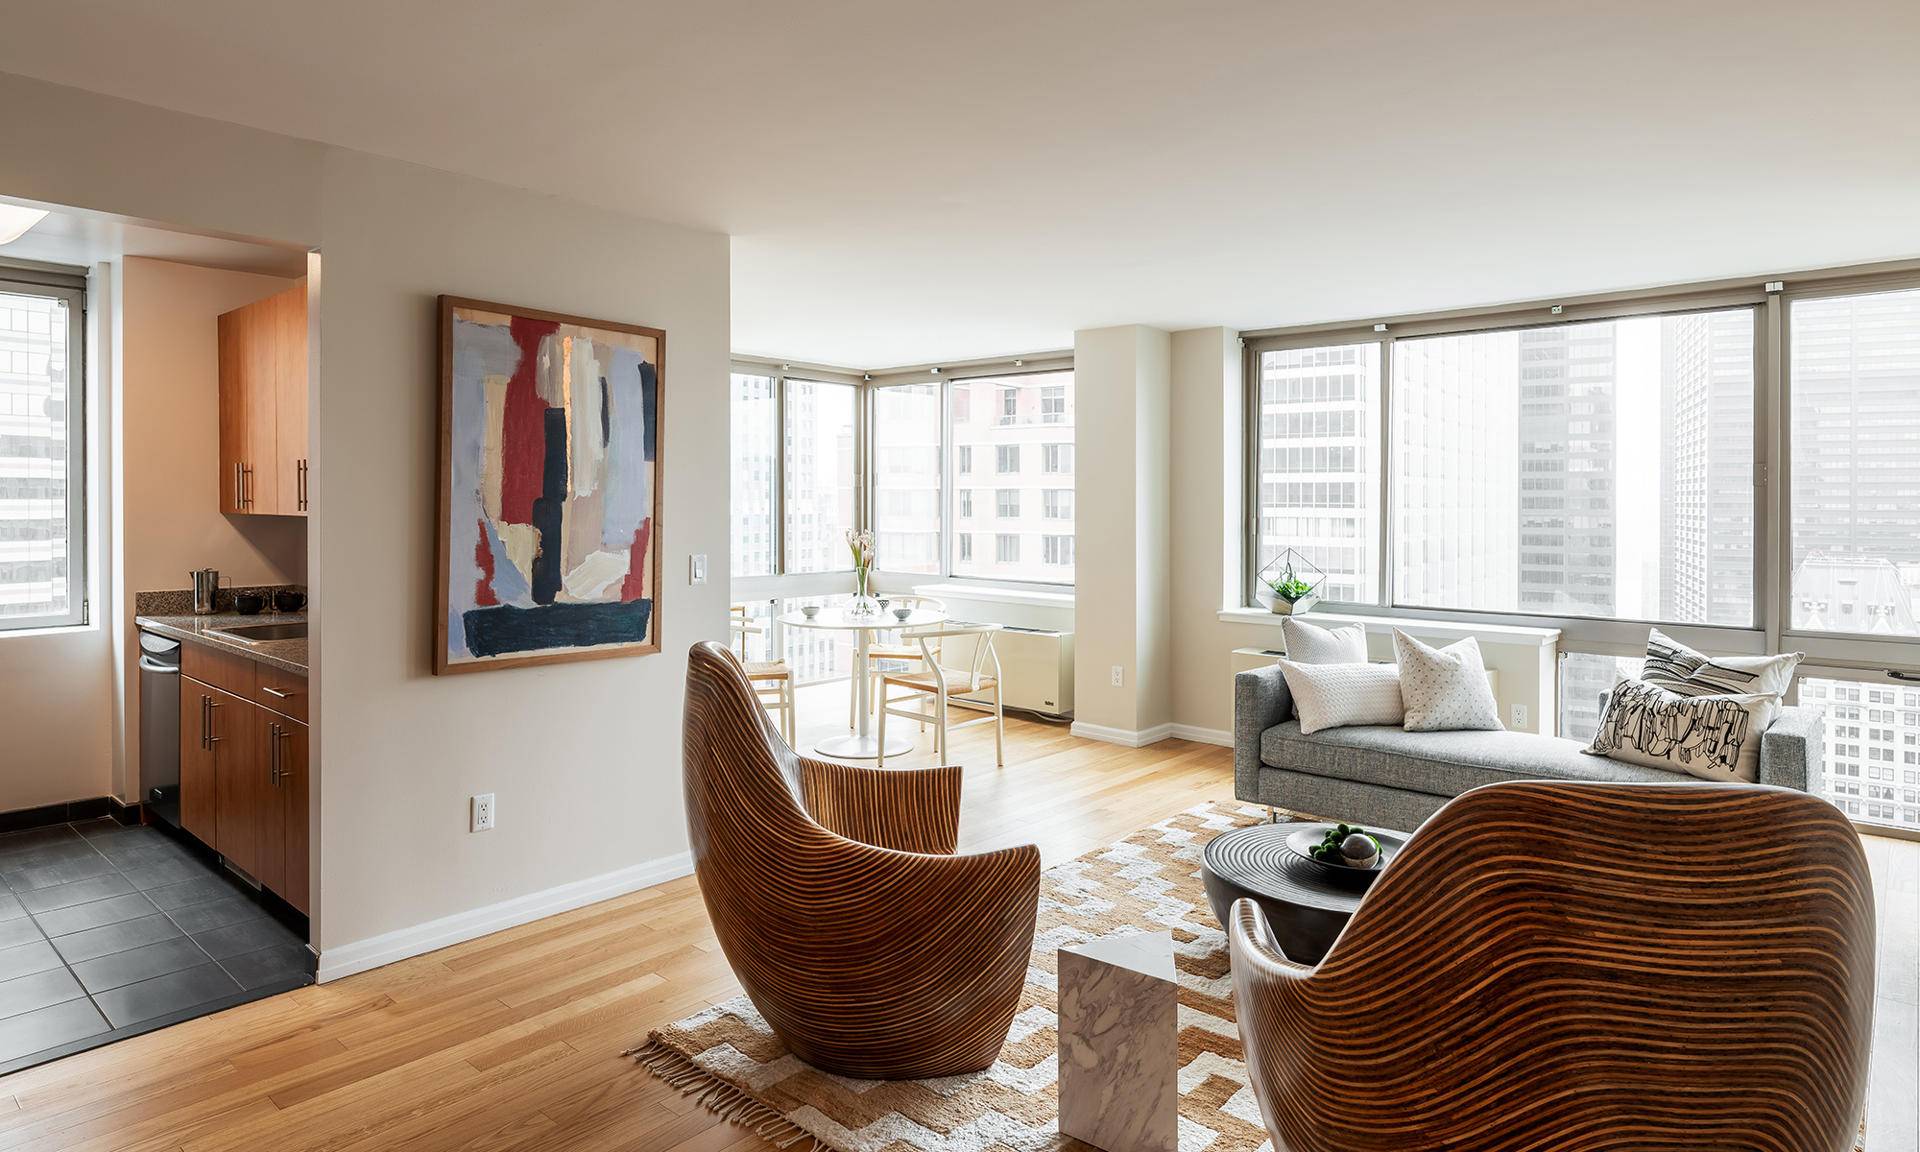 Corner FiDi One Bed/One Bath with Floor-to-Ceiling Views of Midtown